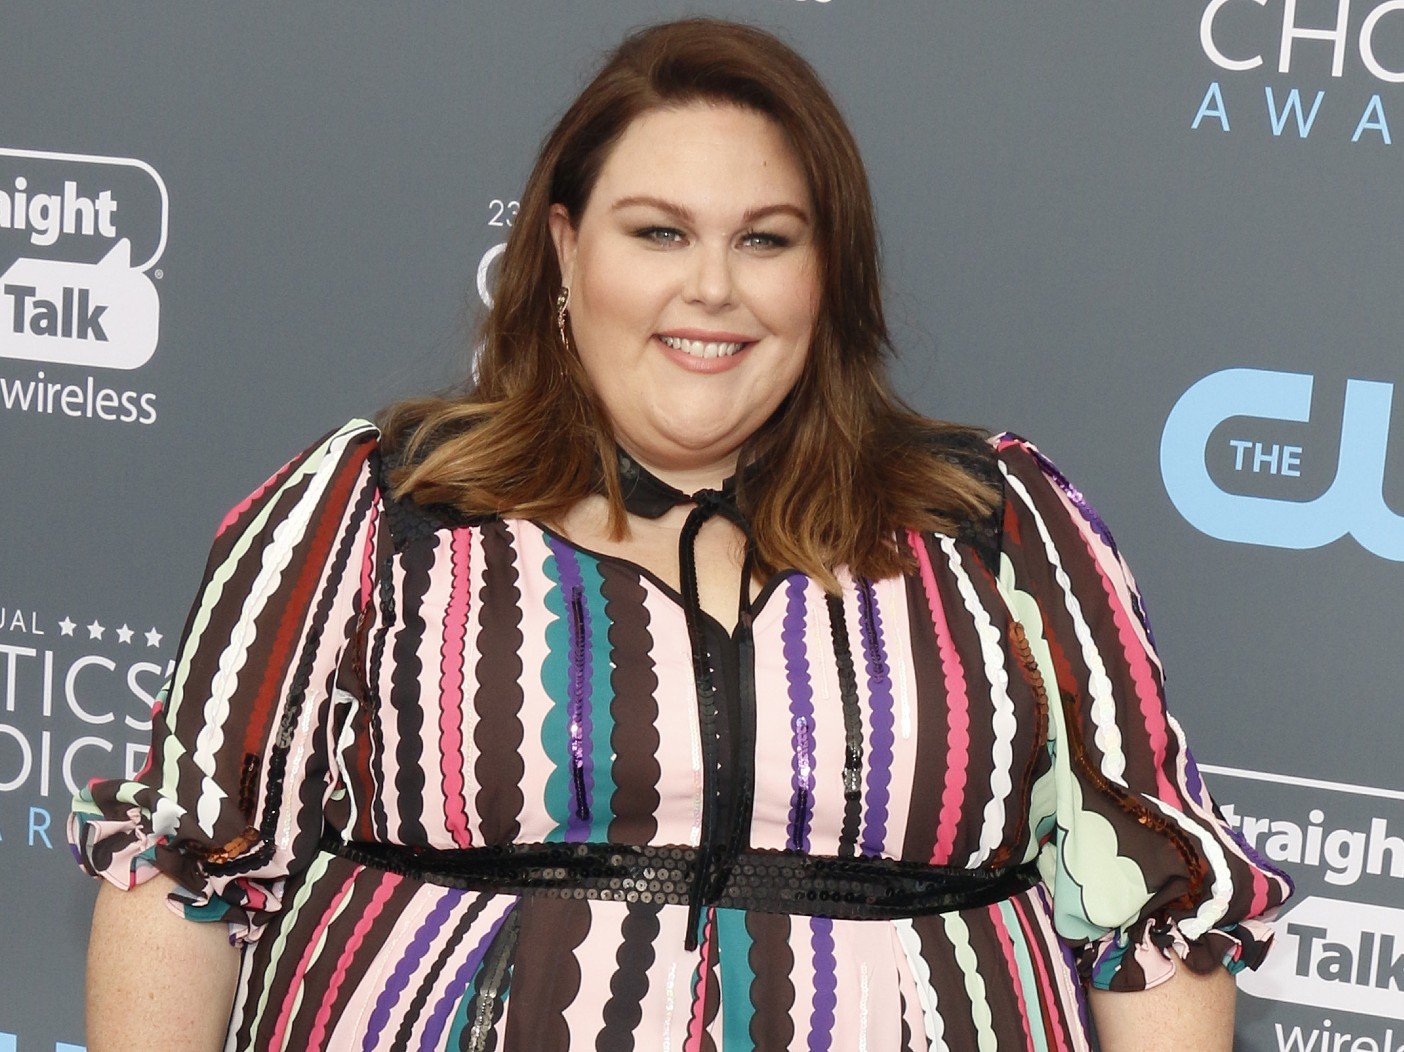 Chrissy Metz Talks About Eating Disorders, How to Change Your Relationship With Food